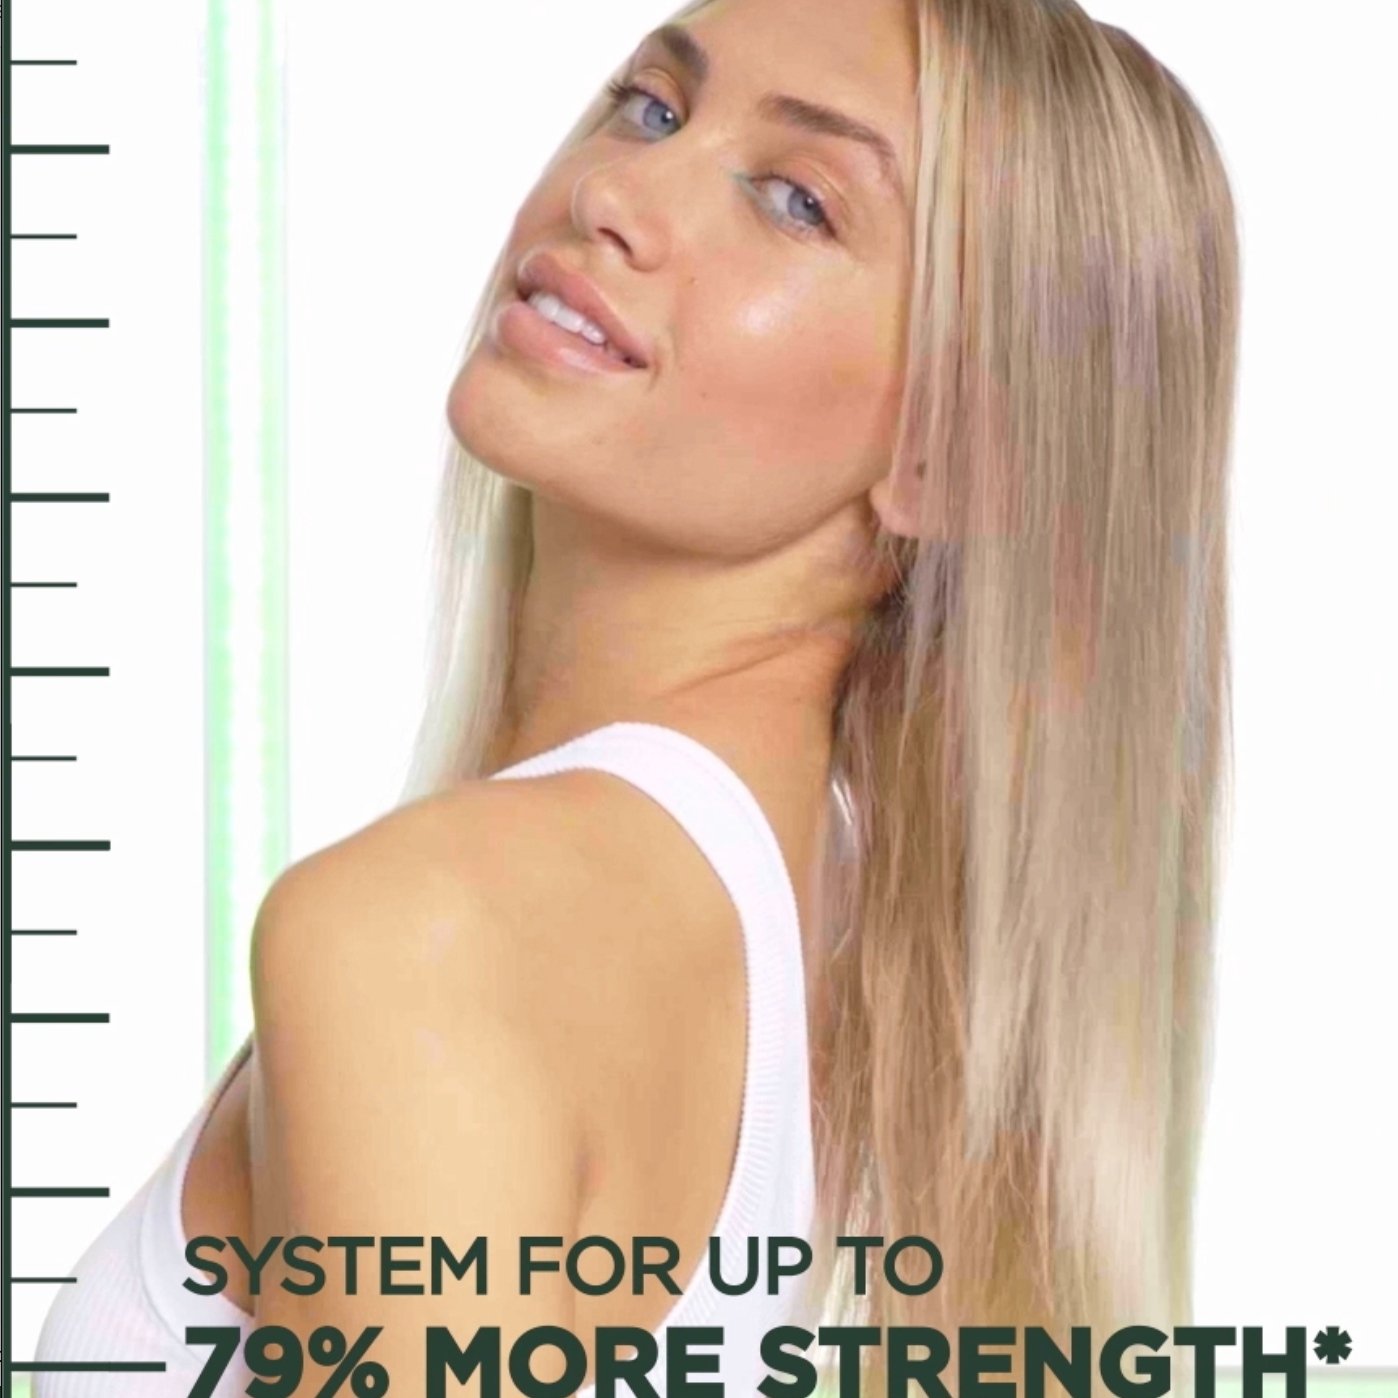 System for up to 79% more strength*